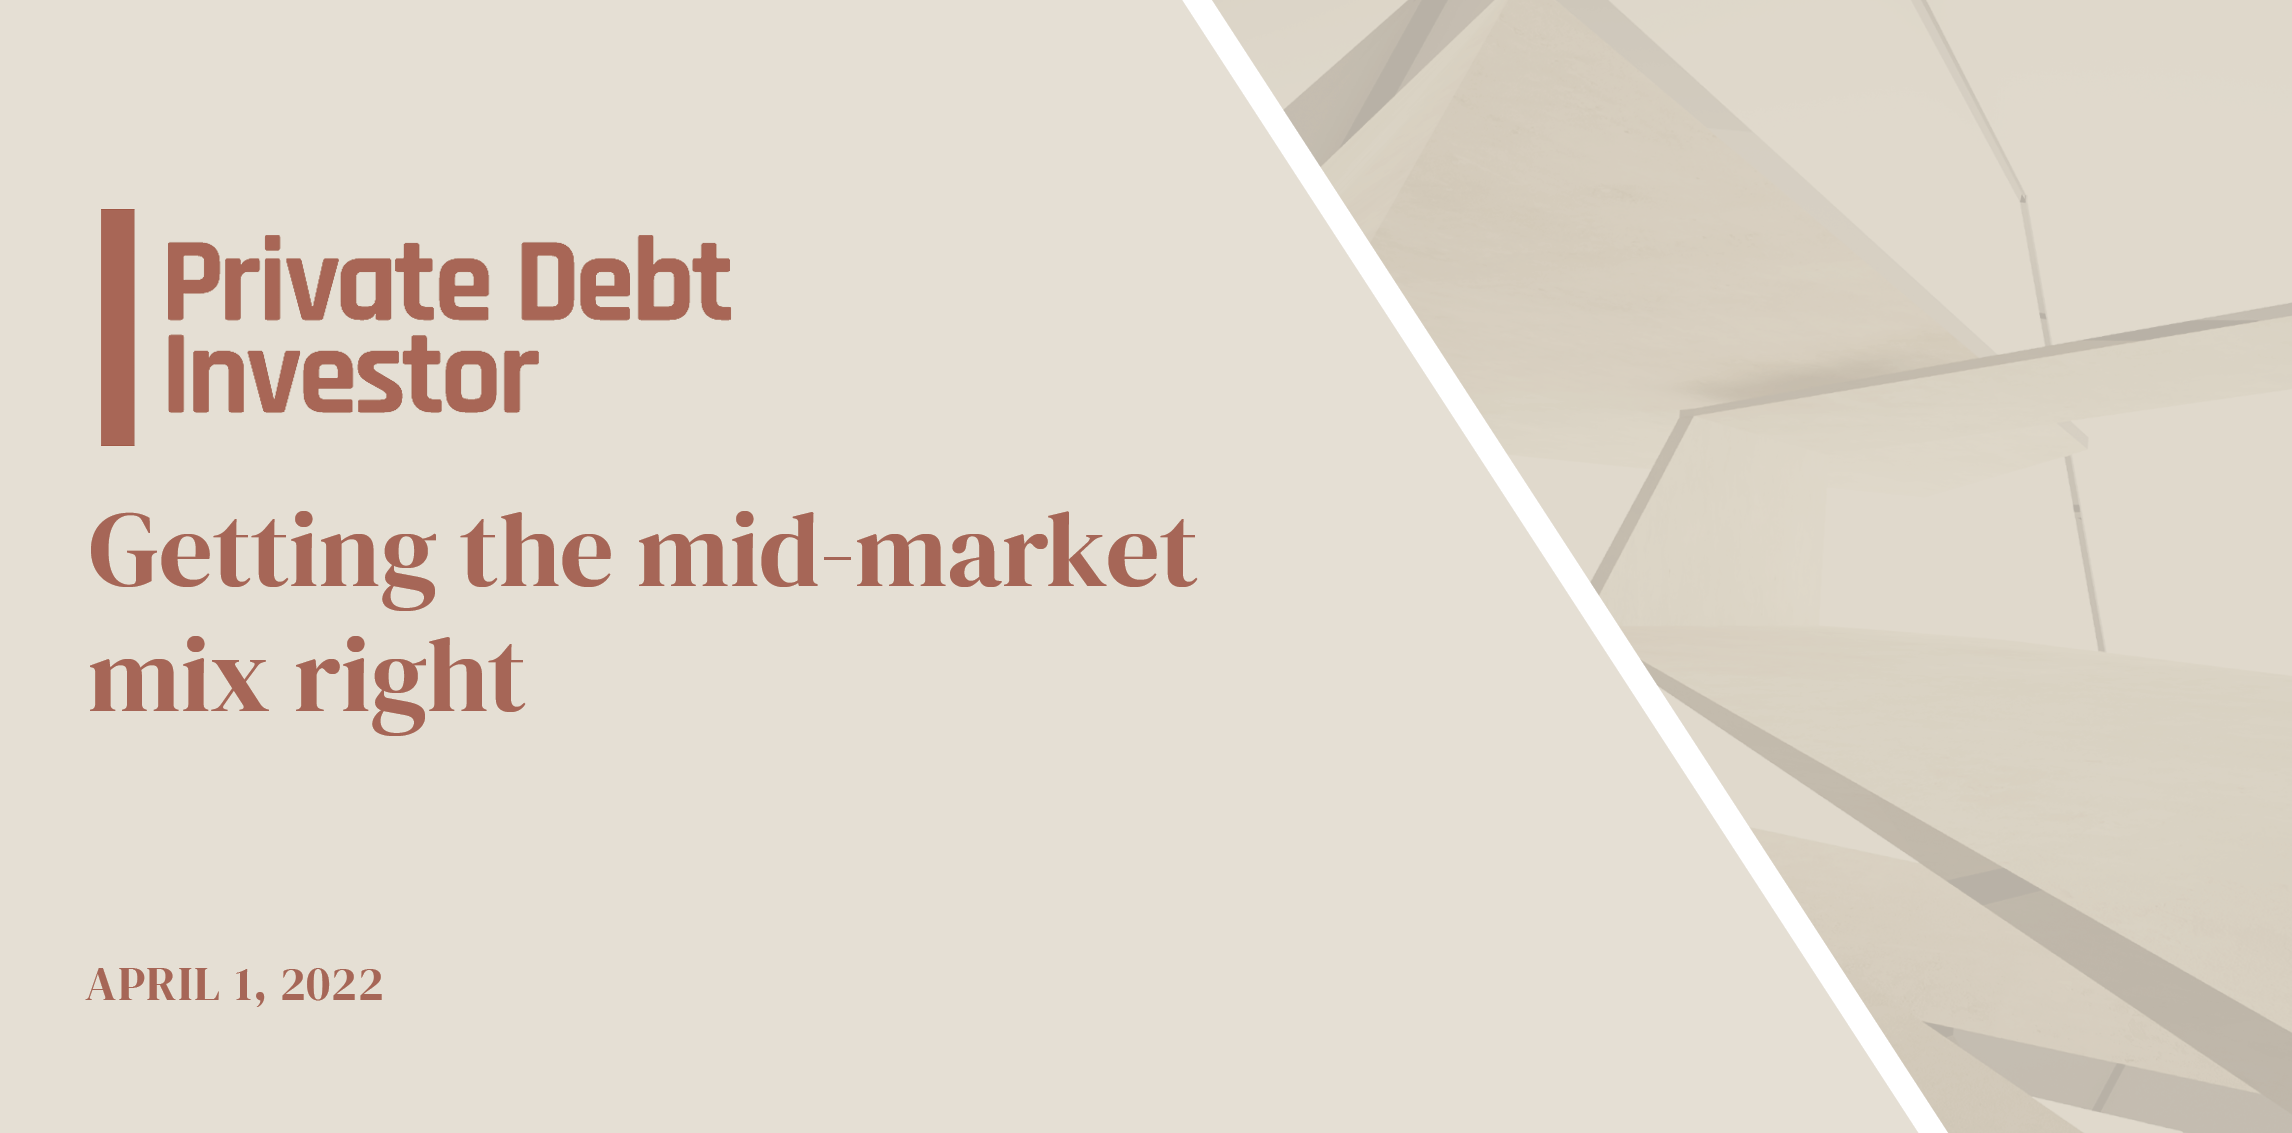 Private Debt Investor: Getting the mid-market mix right